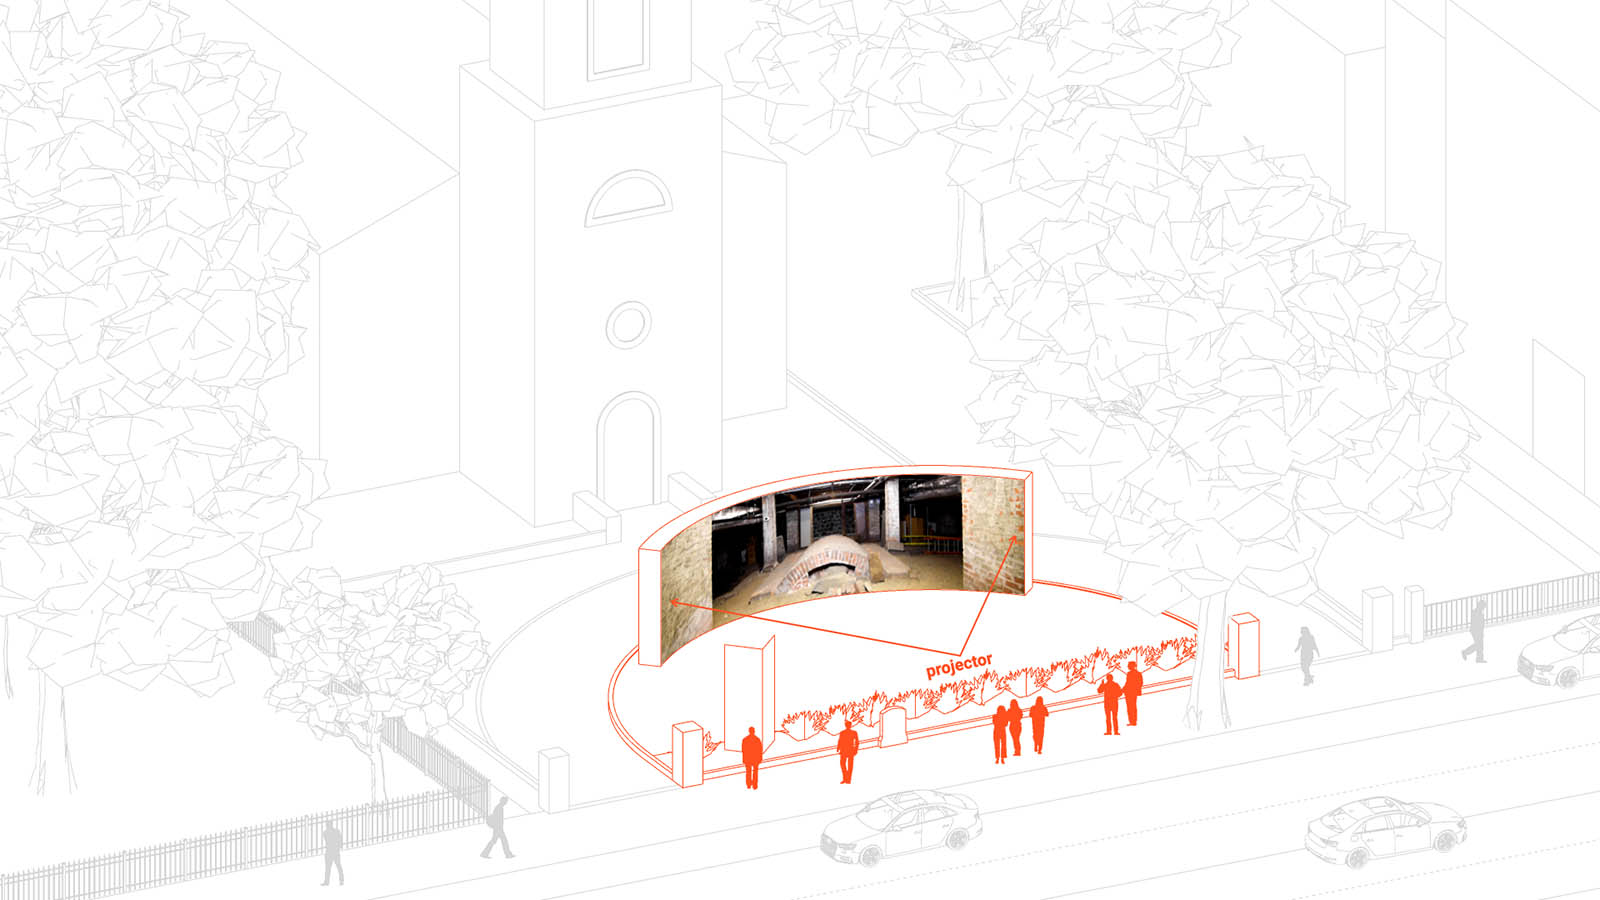 Diagram of the church site featuring a curved wall with projection